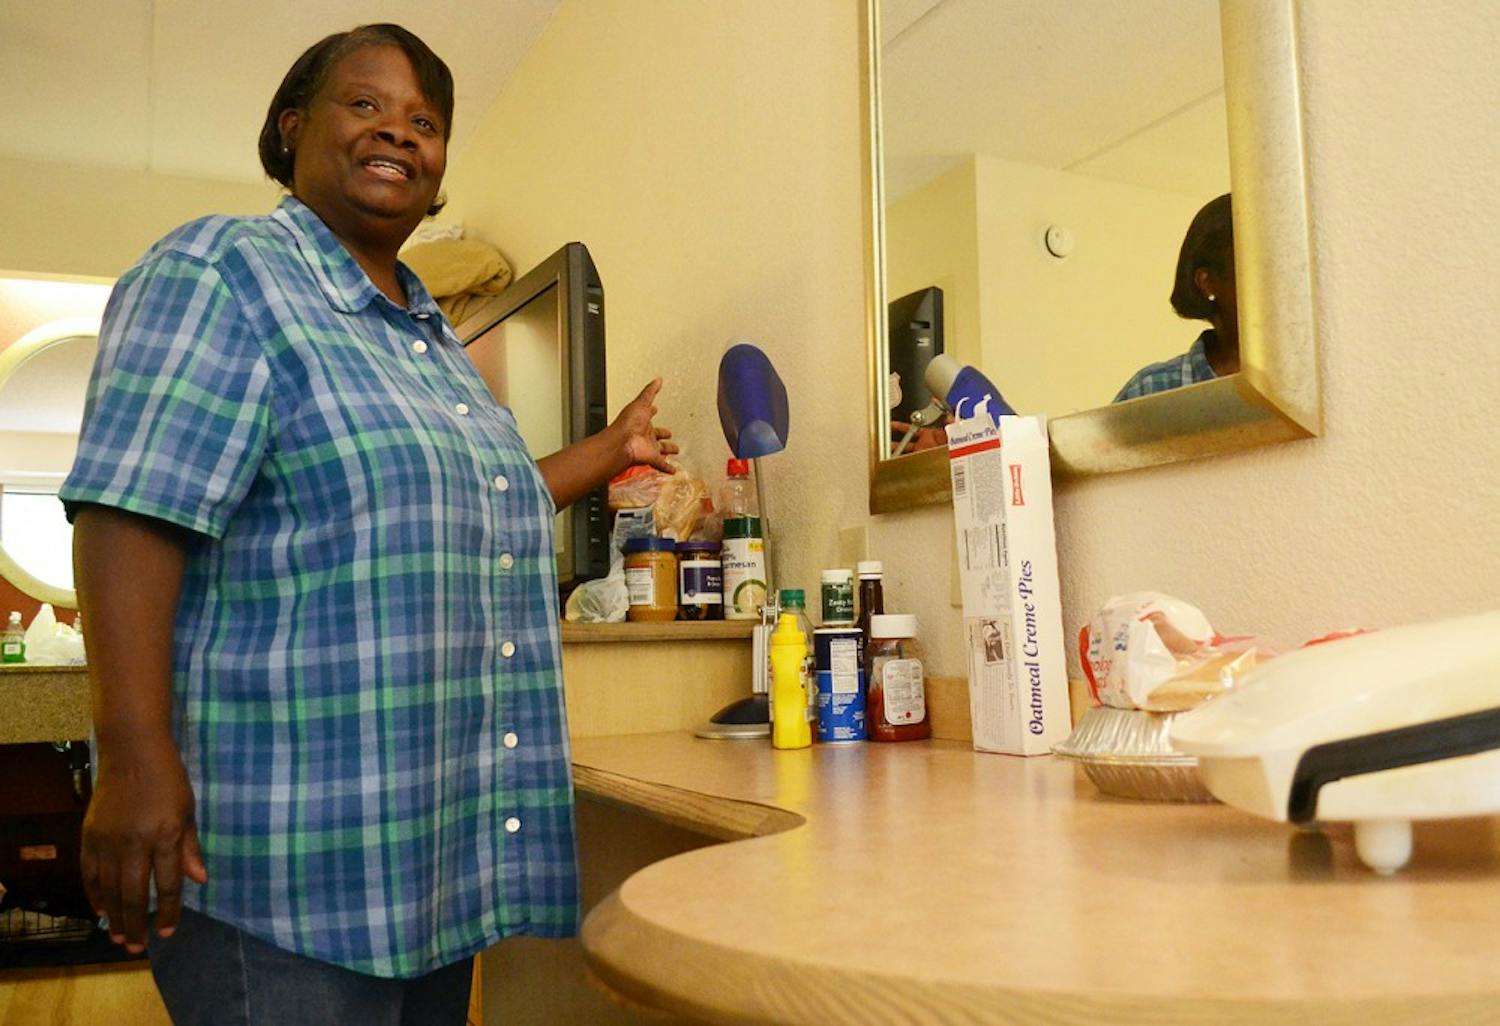 After being evicted from Collins Crossing, Sula Eubanks moved to Red Roof Inn with her husband, daughter. and two chihauhaus. They have learned to make do with fewer immenties by cooking on a George Forman Grill and keeping perishable food iced in the sink. 